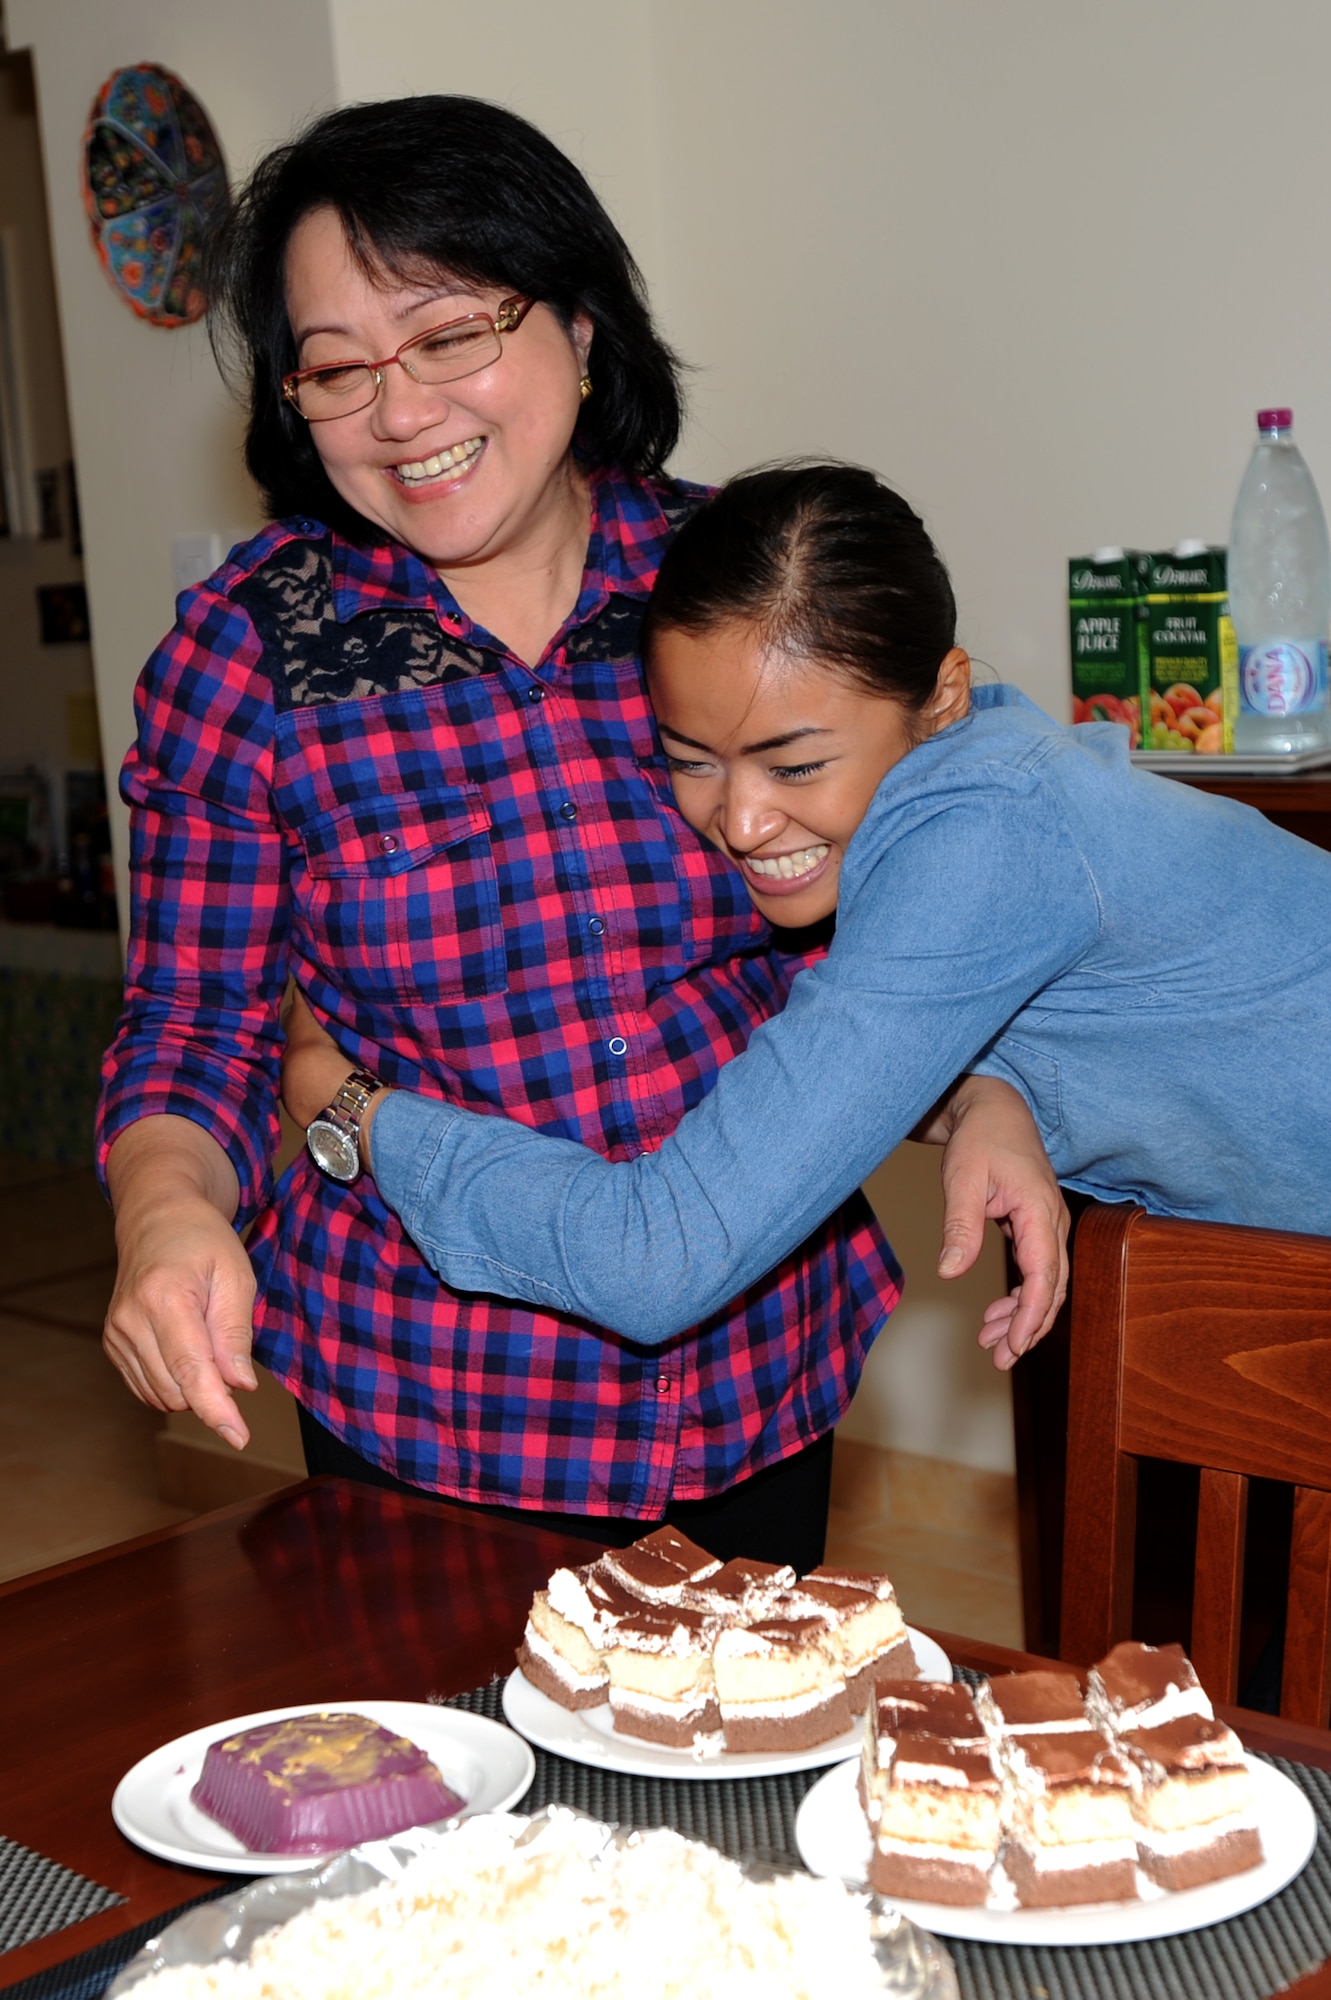 U.S. Air Force Senior Airman Joyce Tucker, 379th Expeditionary Civil Engineer Squadron construction site manager, hugs her grandmother, Lolly Pagdanganan, in Southwest Asia, September 5, 2012. Tucker recently met her grandparents for the first time in 22 years and is maximizing the time with them here while deployed. (U.S. Air Force photo/Staff Sgt. Sheila deVera)